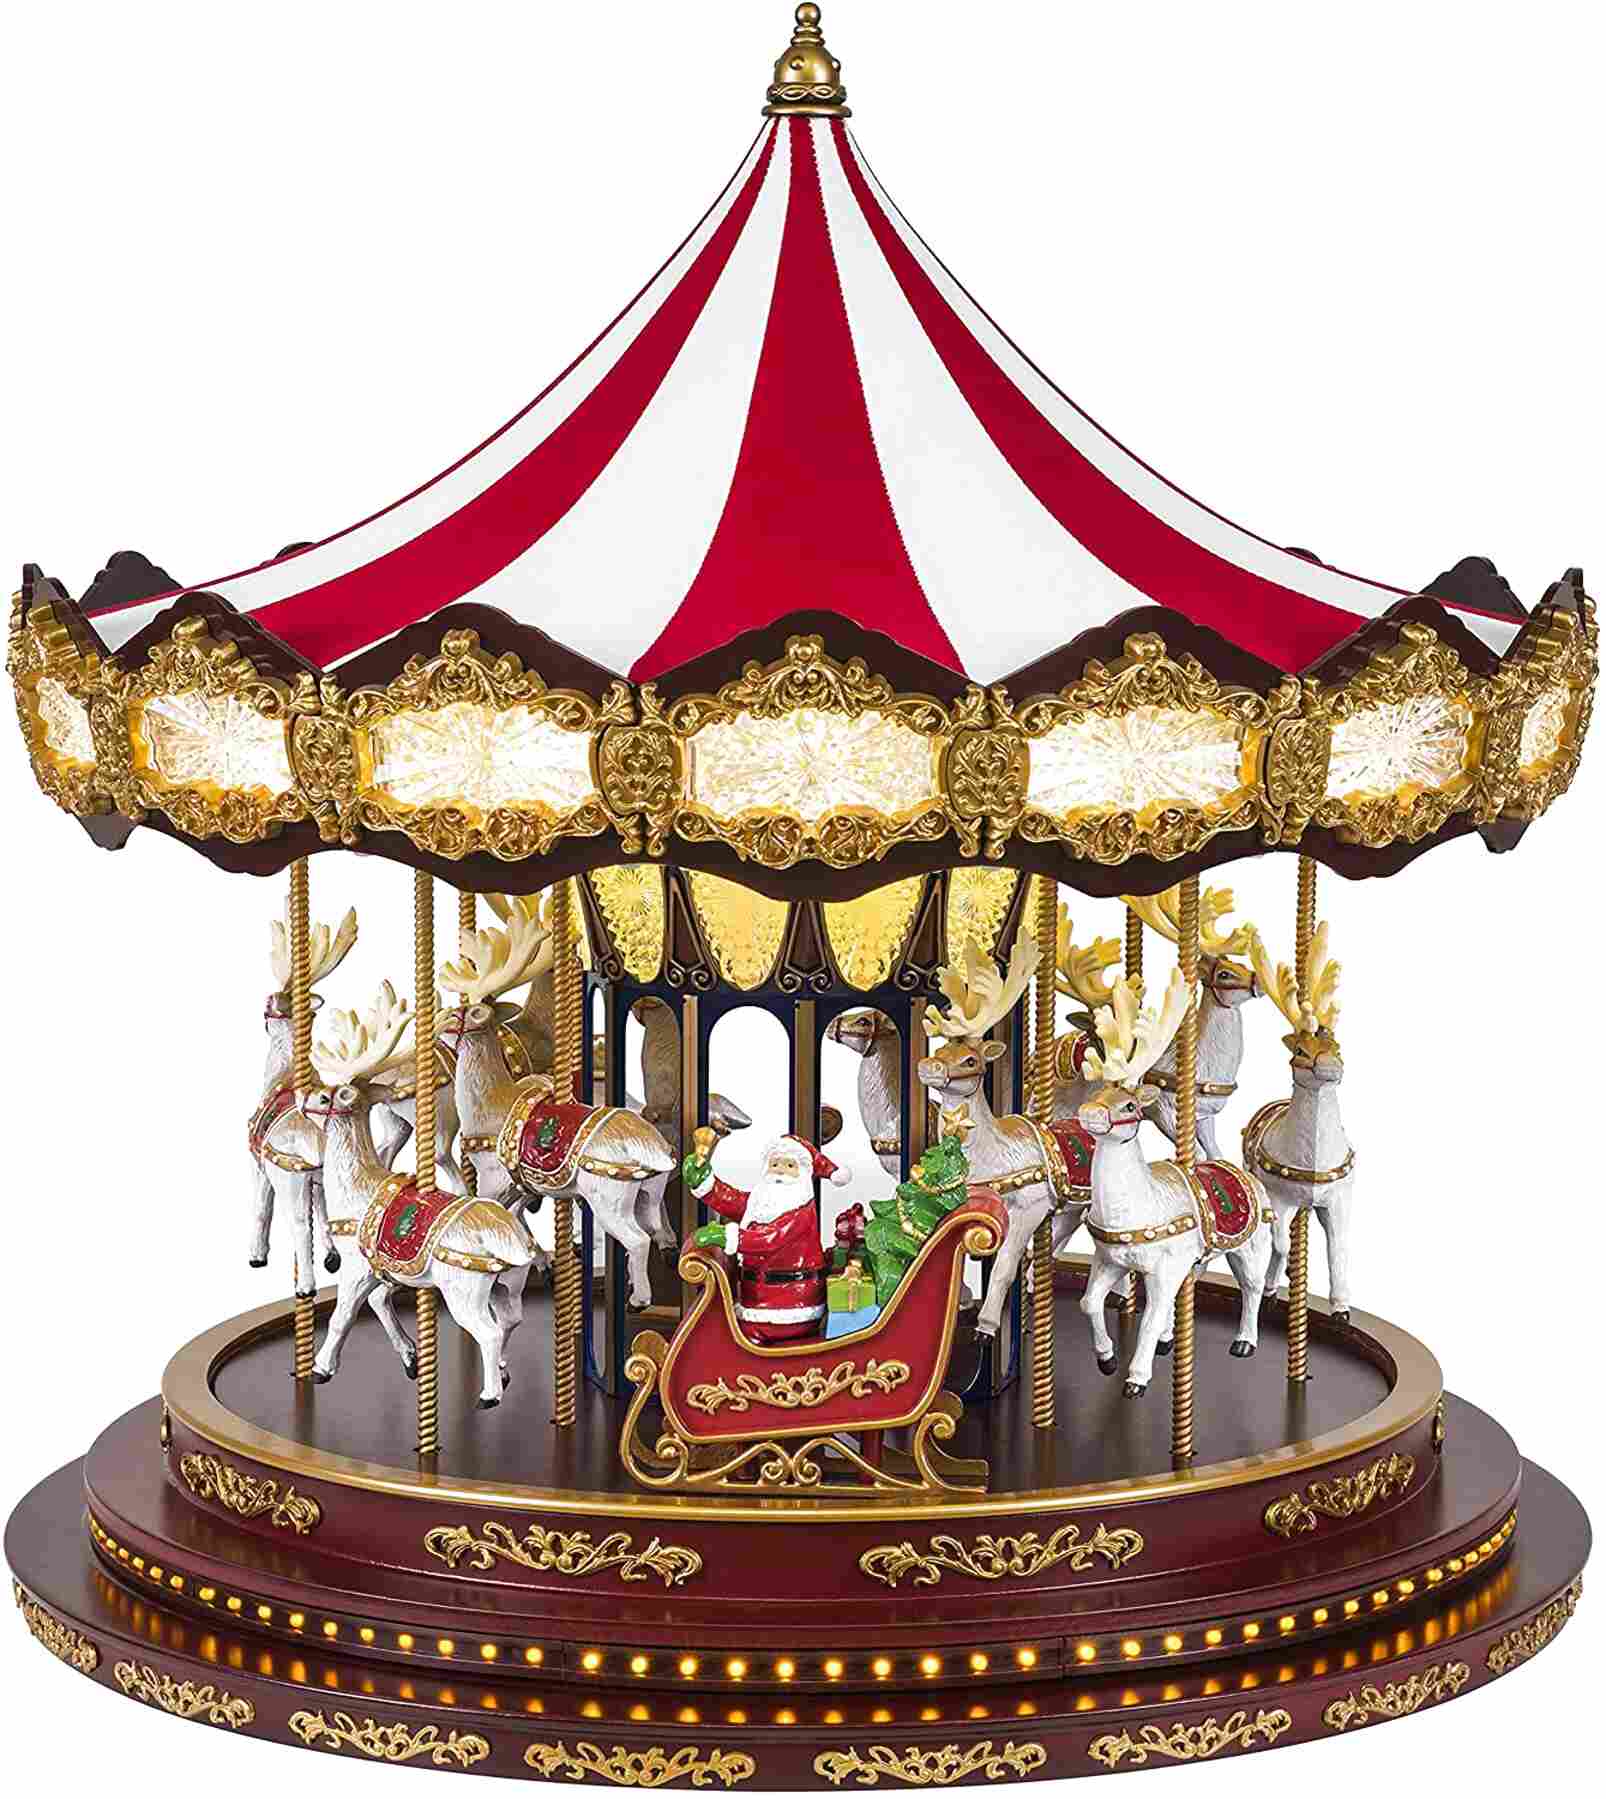 Mr Christmas Carousel for sale in UK | 66 used Mr Christmas Carousels